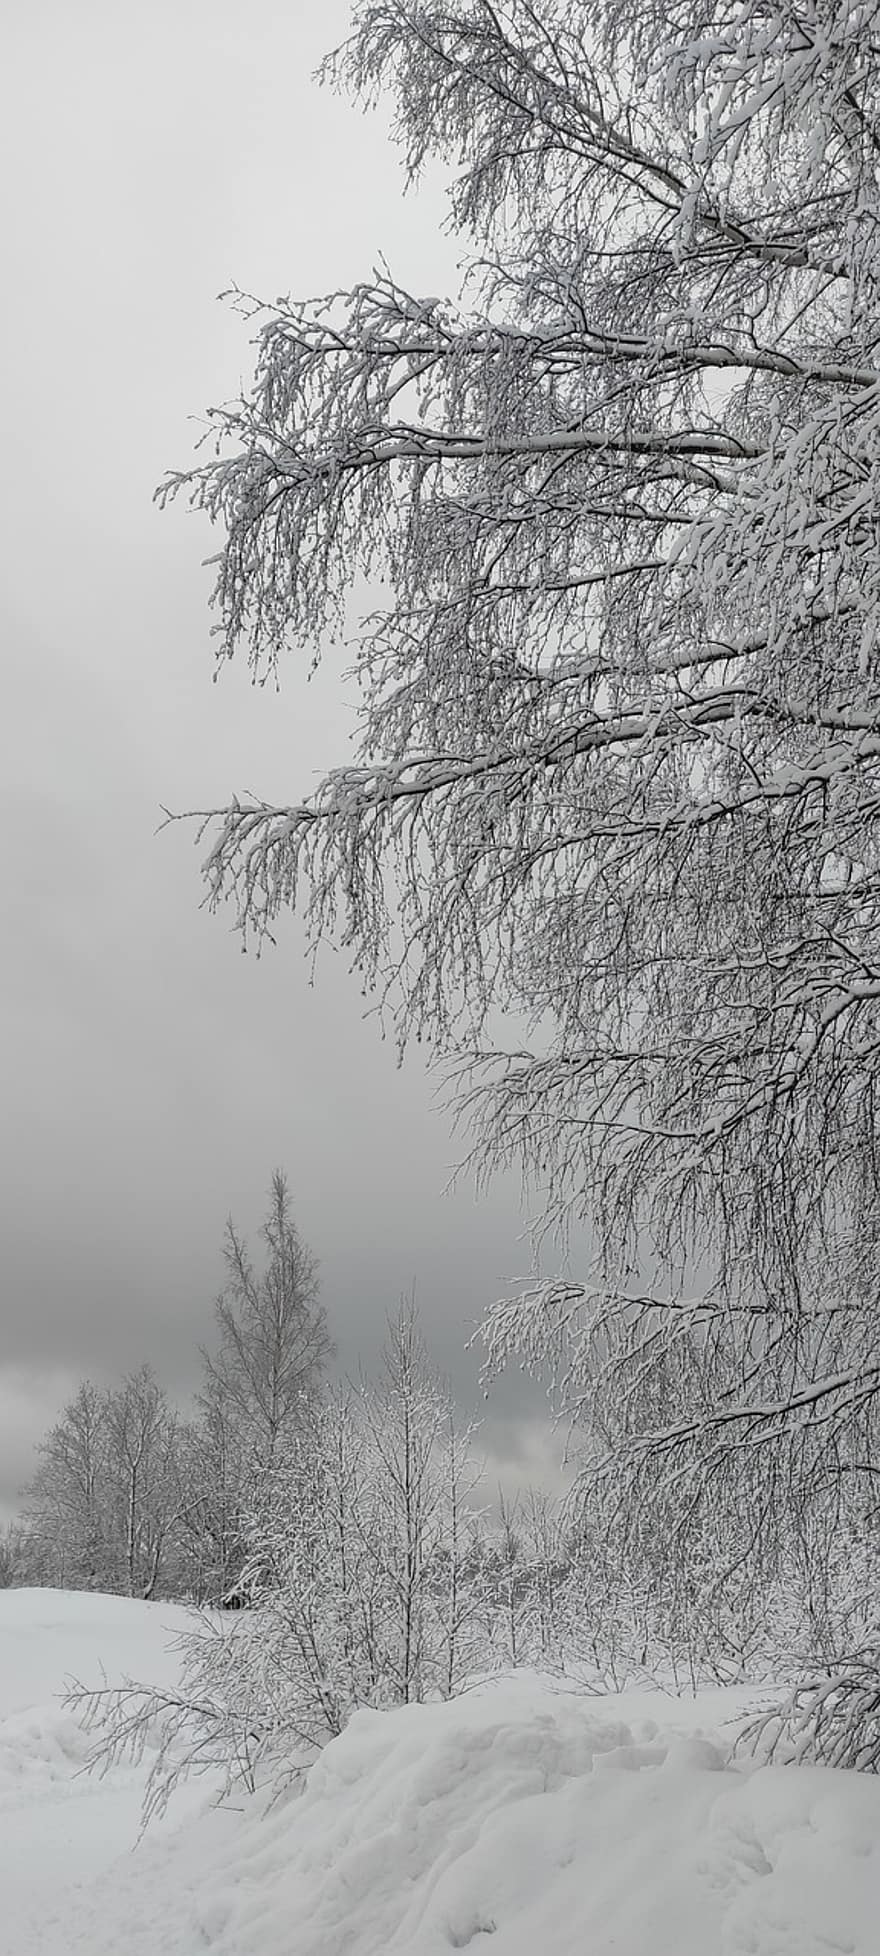 Winter, Nature, Season, Snow, Trees, Outdoors, tree, forest, landscape, frost, branch